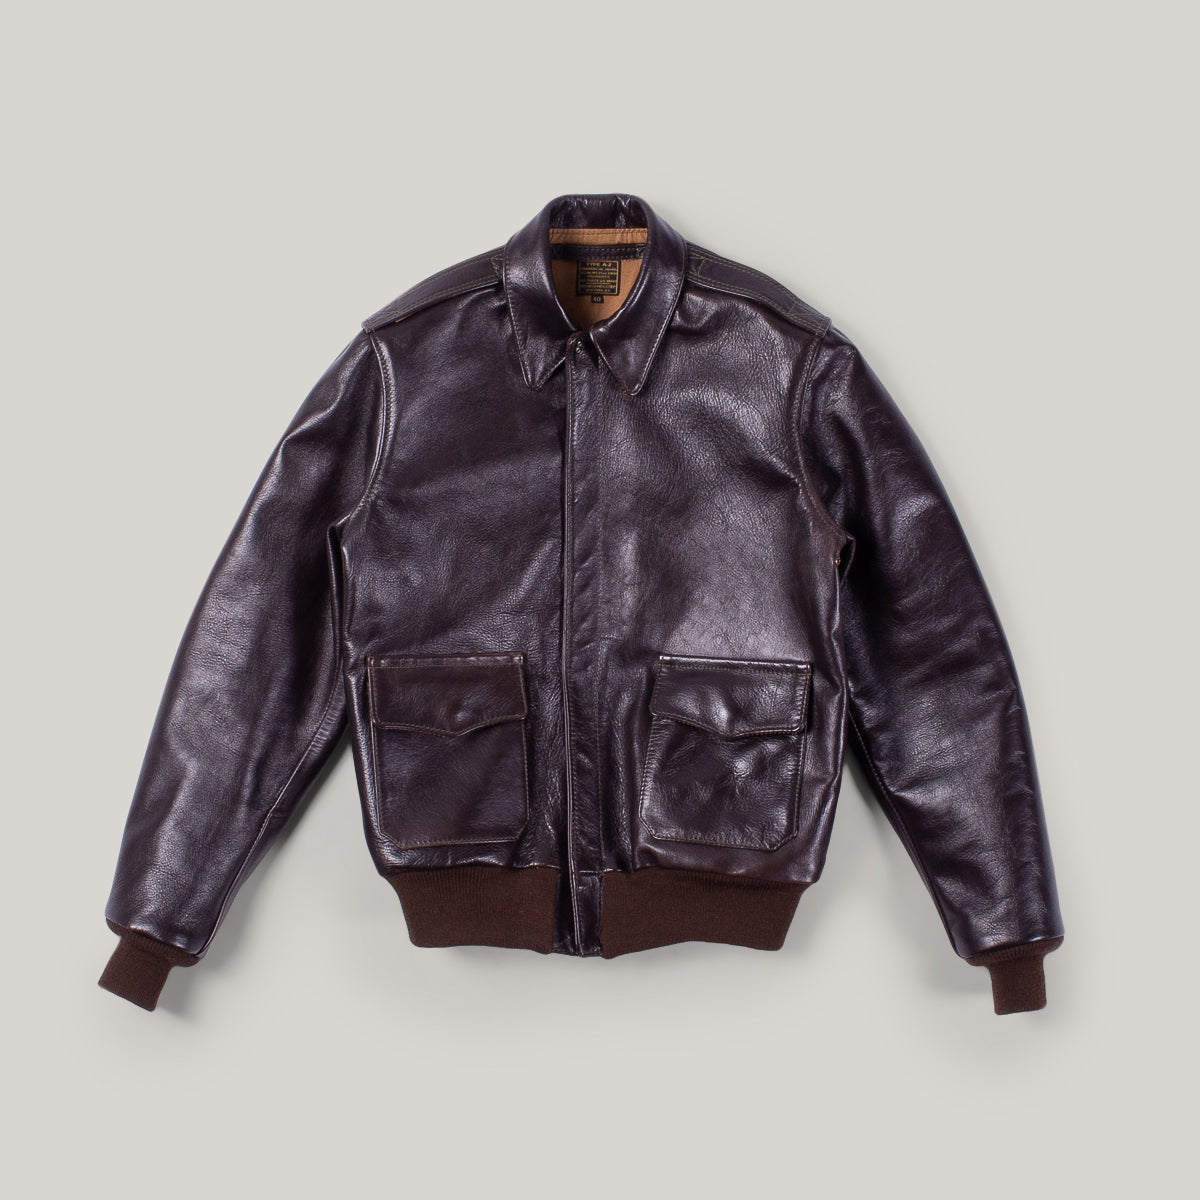 AERO LEATHER A2 BRONCO - SEAL HORSEHIDE/MID BROWN KNIT – Pickings and Parry